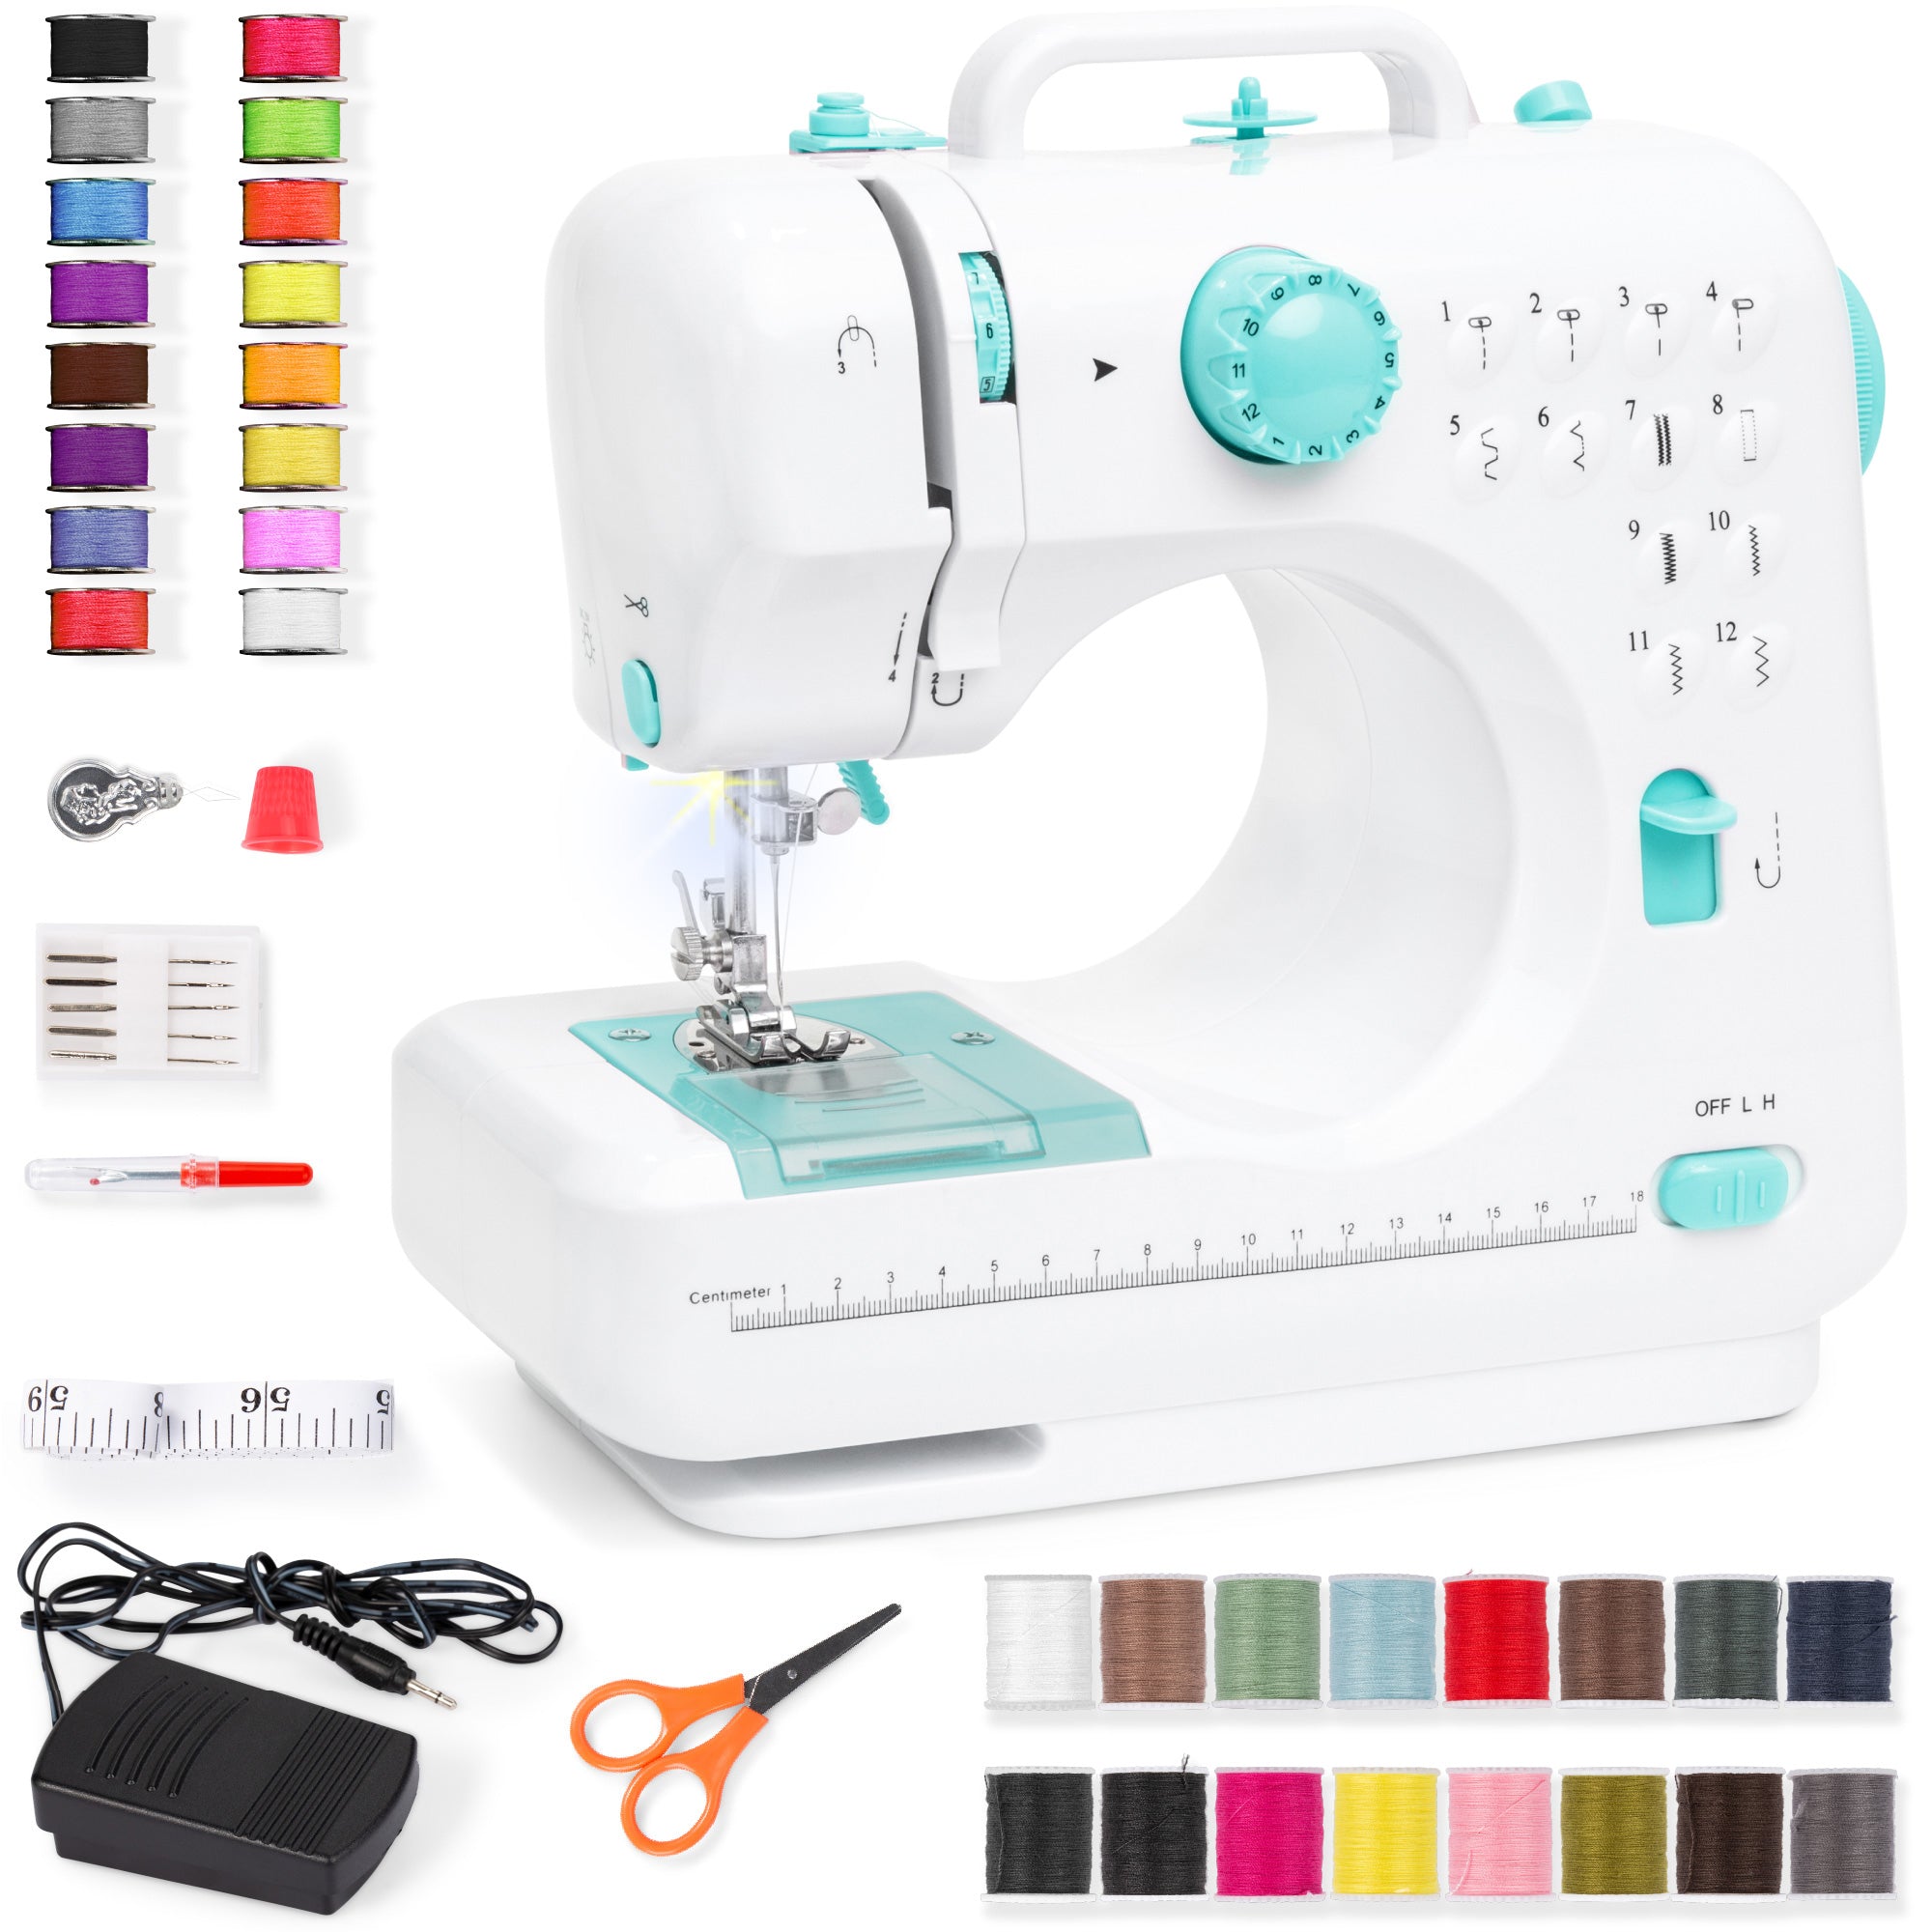 6V Portable Foot Pedal Sewing Machine w/ 12 Stitch Patterns – Best